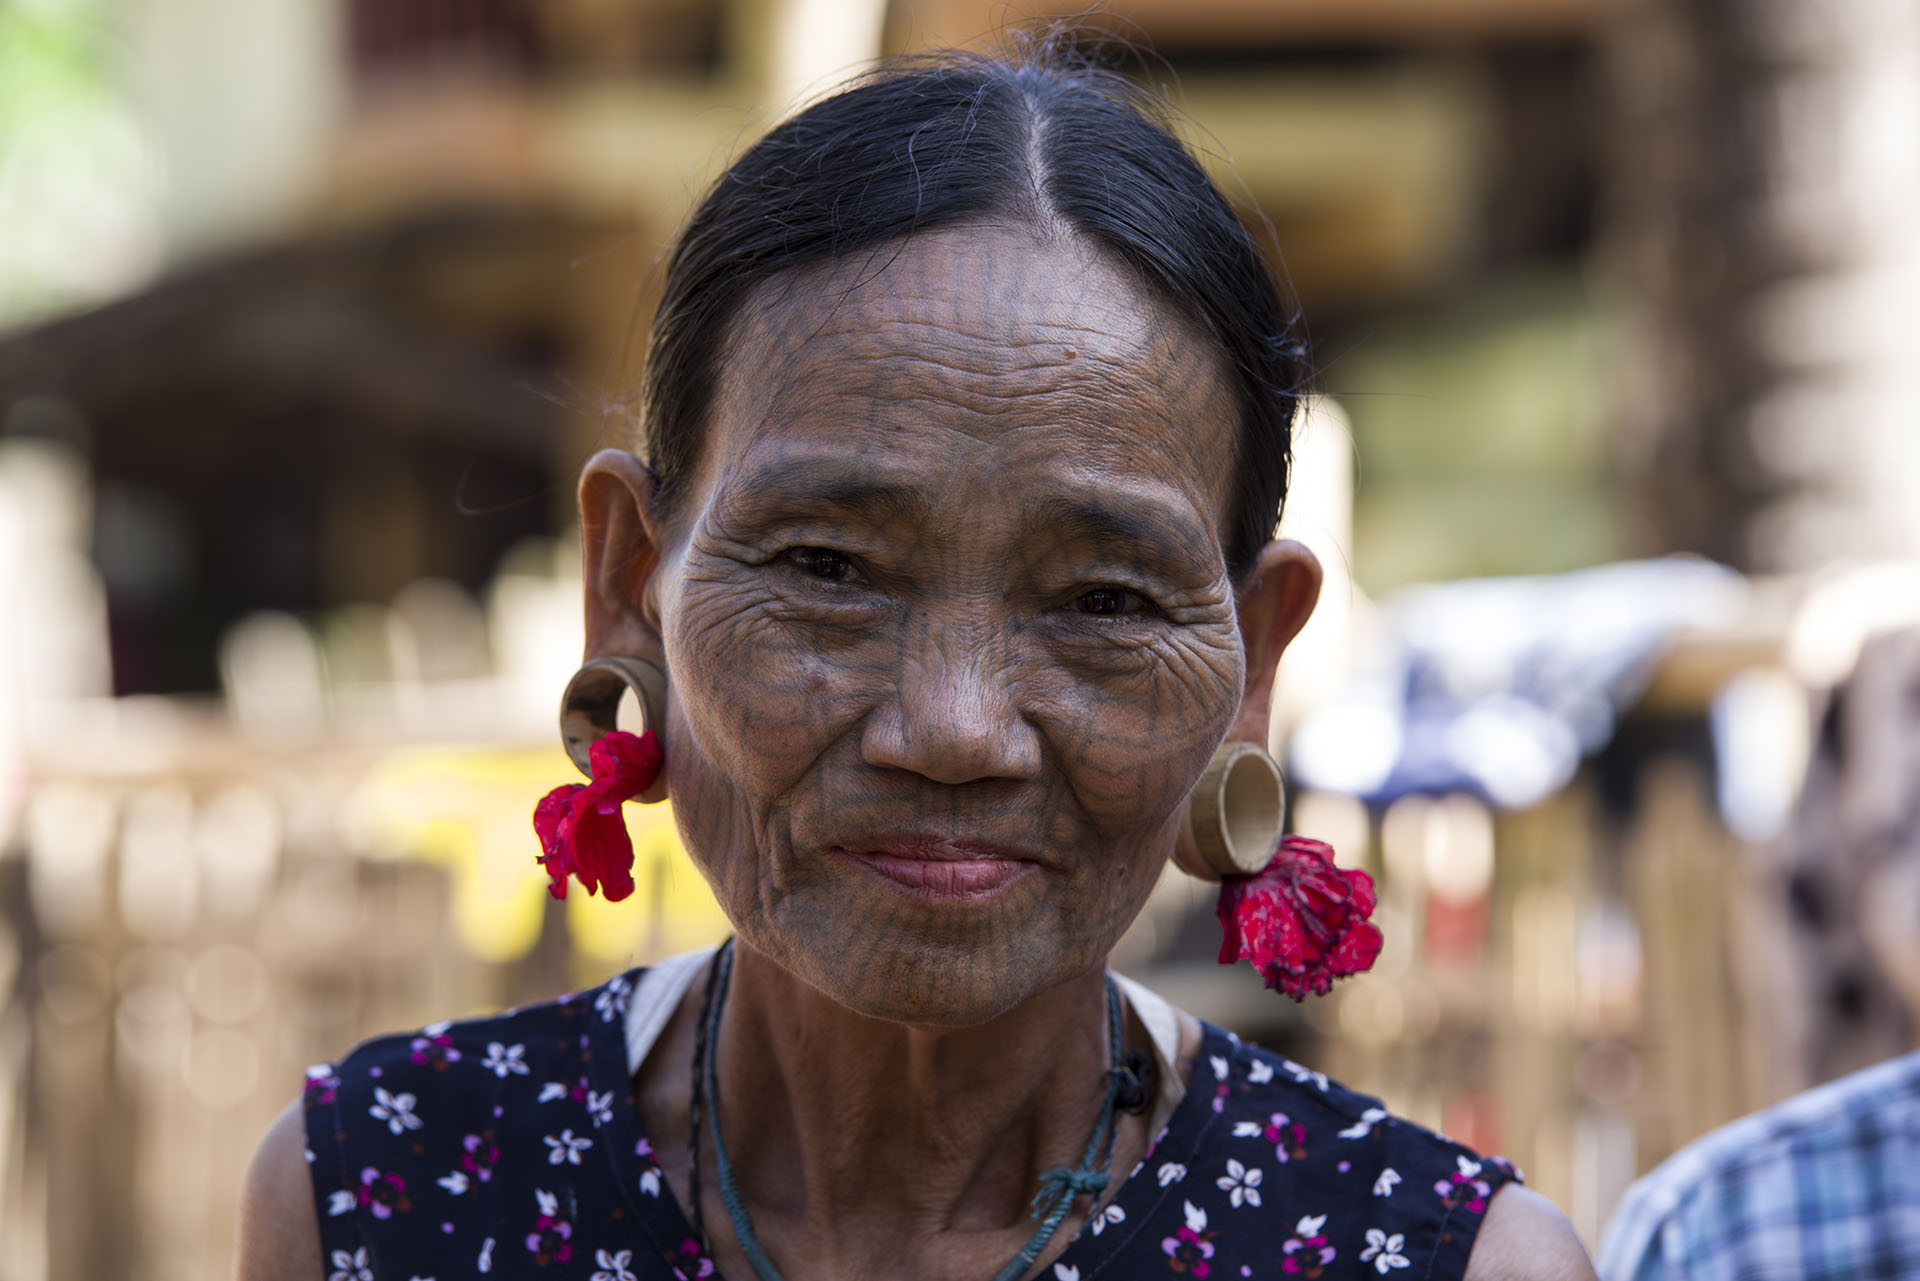 Chin villages, tattoos and curiosities